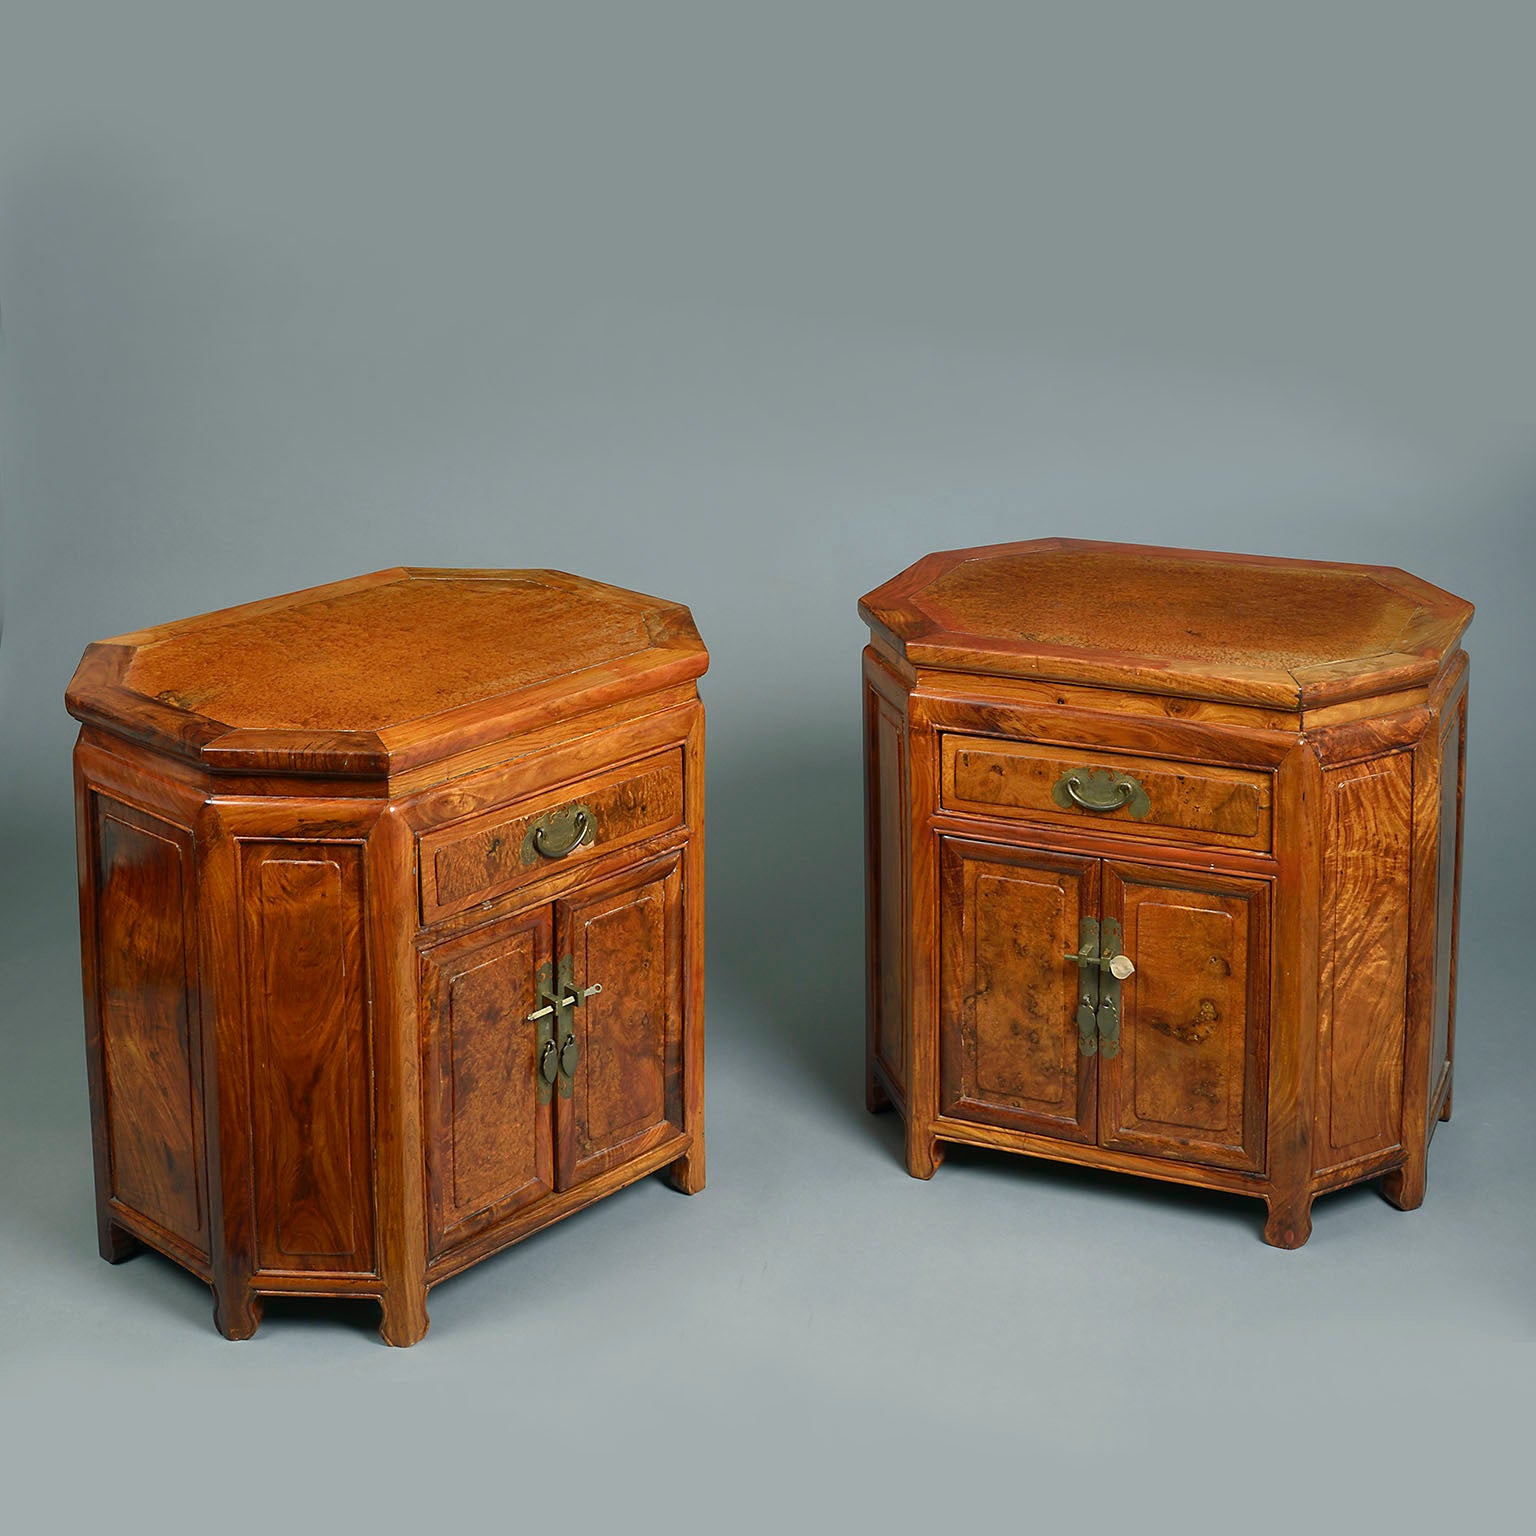 Pair of Chinese Cabinets